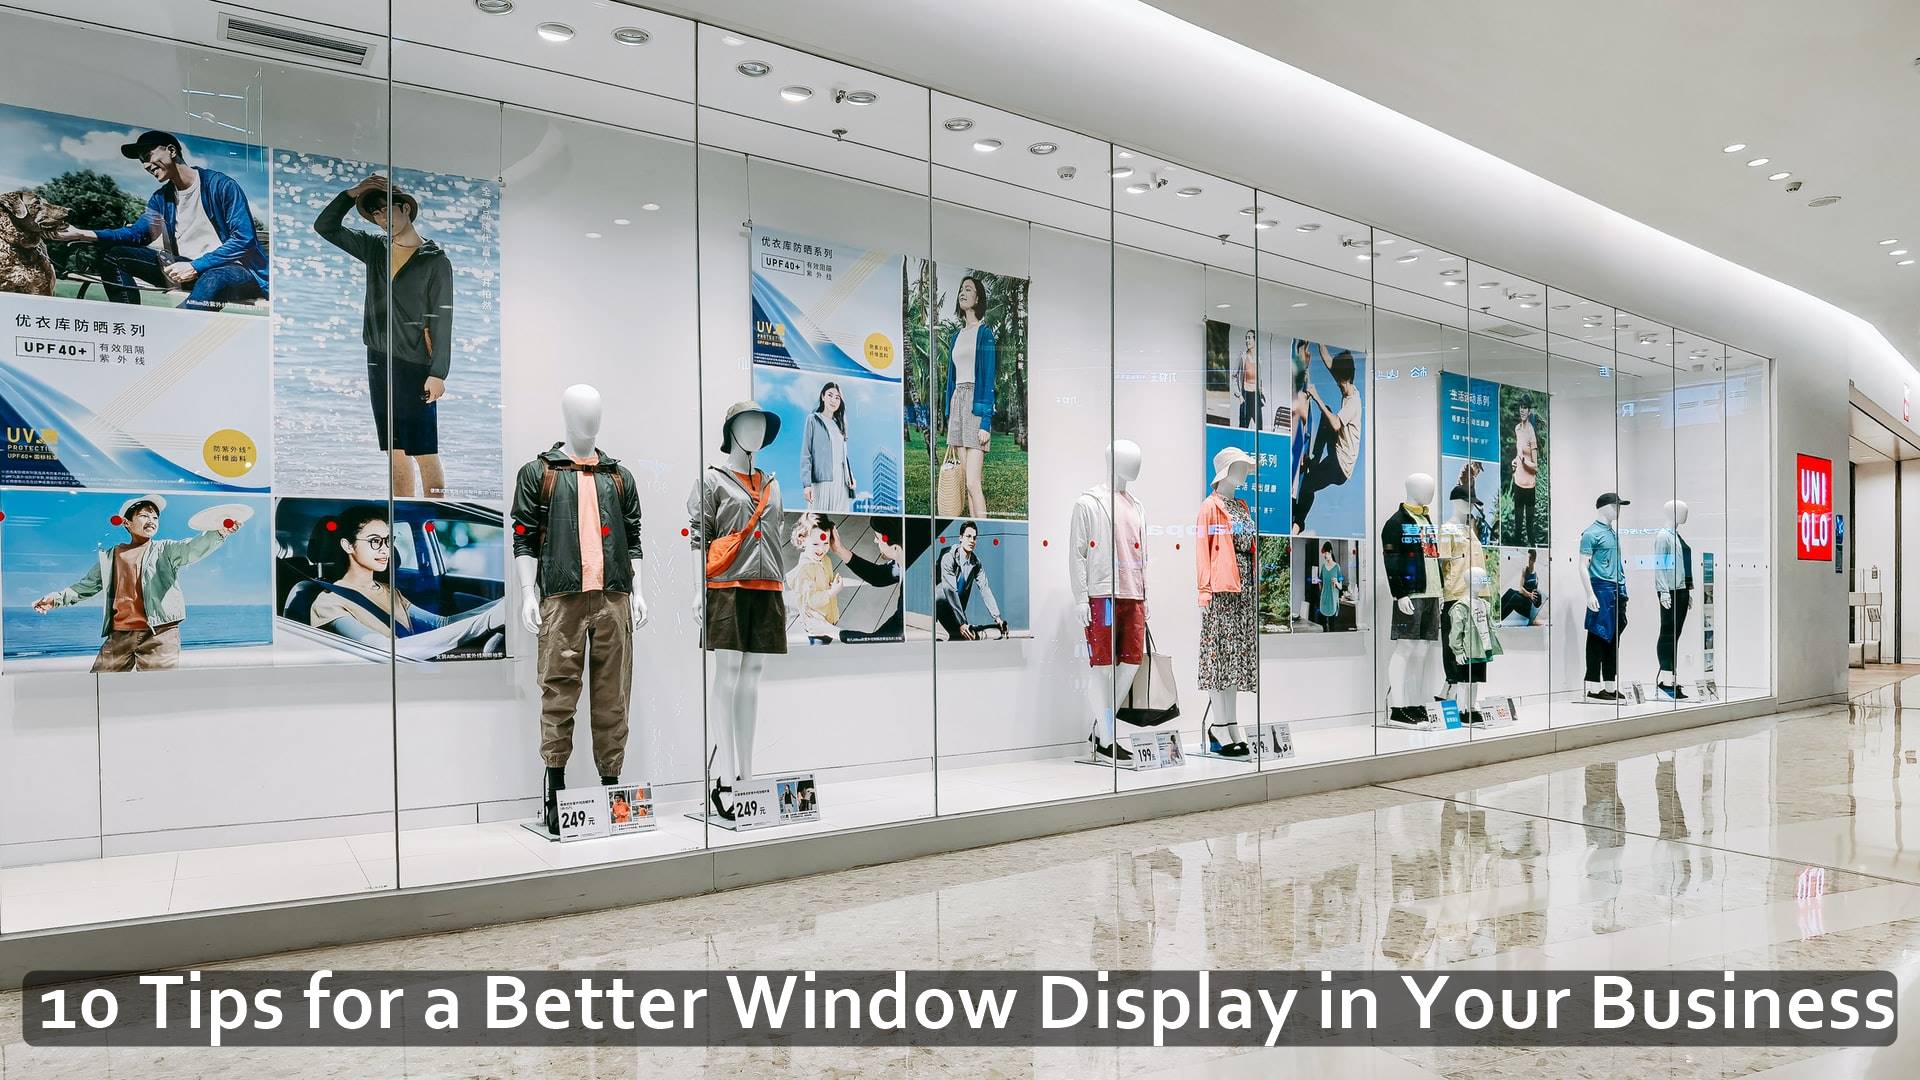 10 Tips for a Better Window Display in Your Business